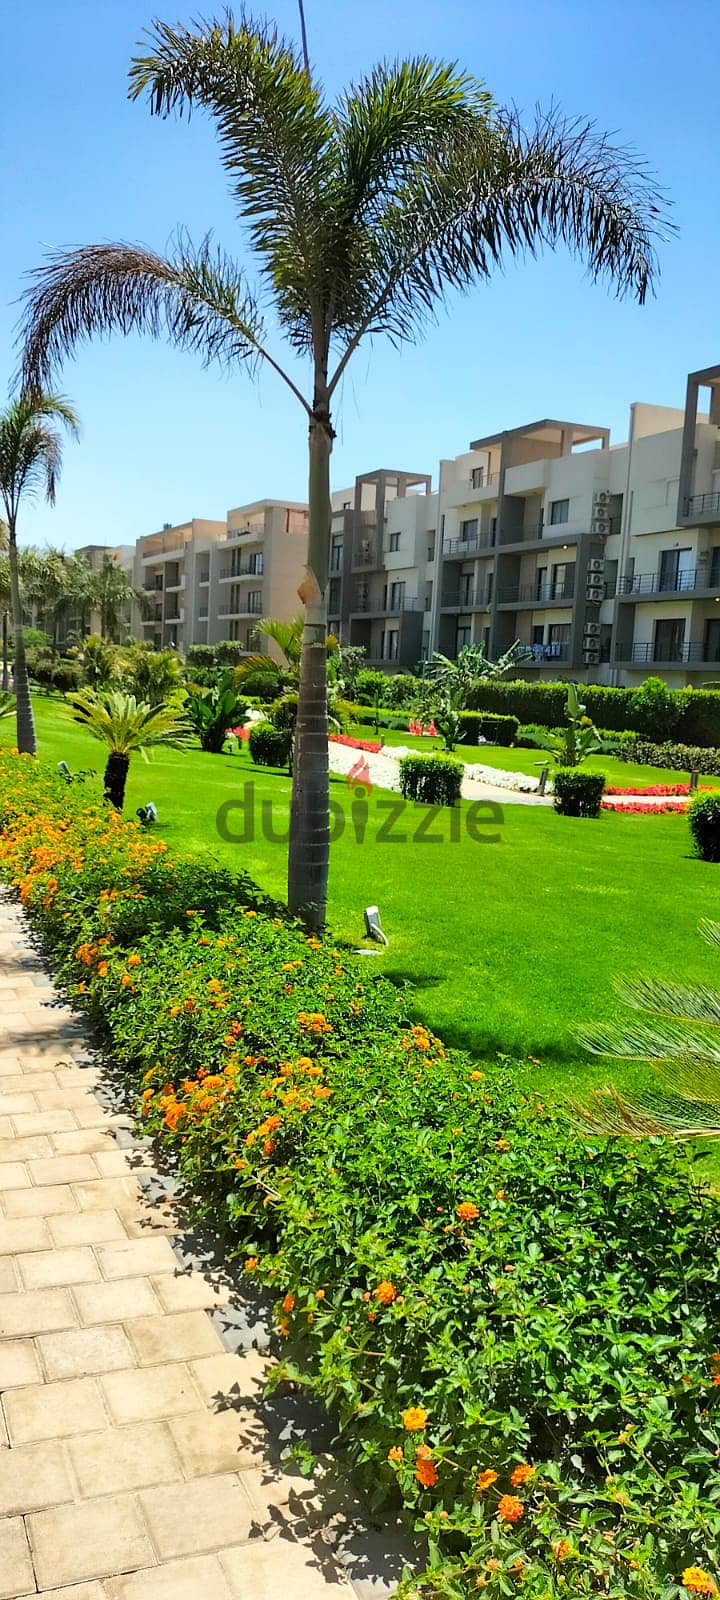 Apartment for sale with private garden, fully finished, with air conditioners The kitchen and appliances are less than the market price 3